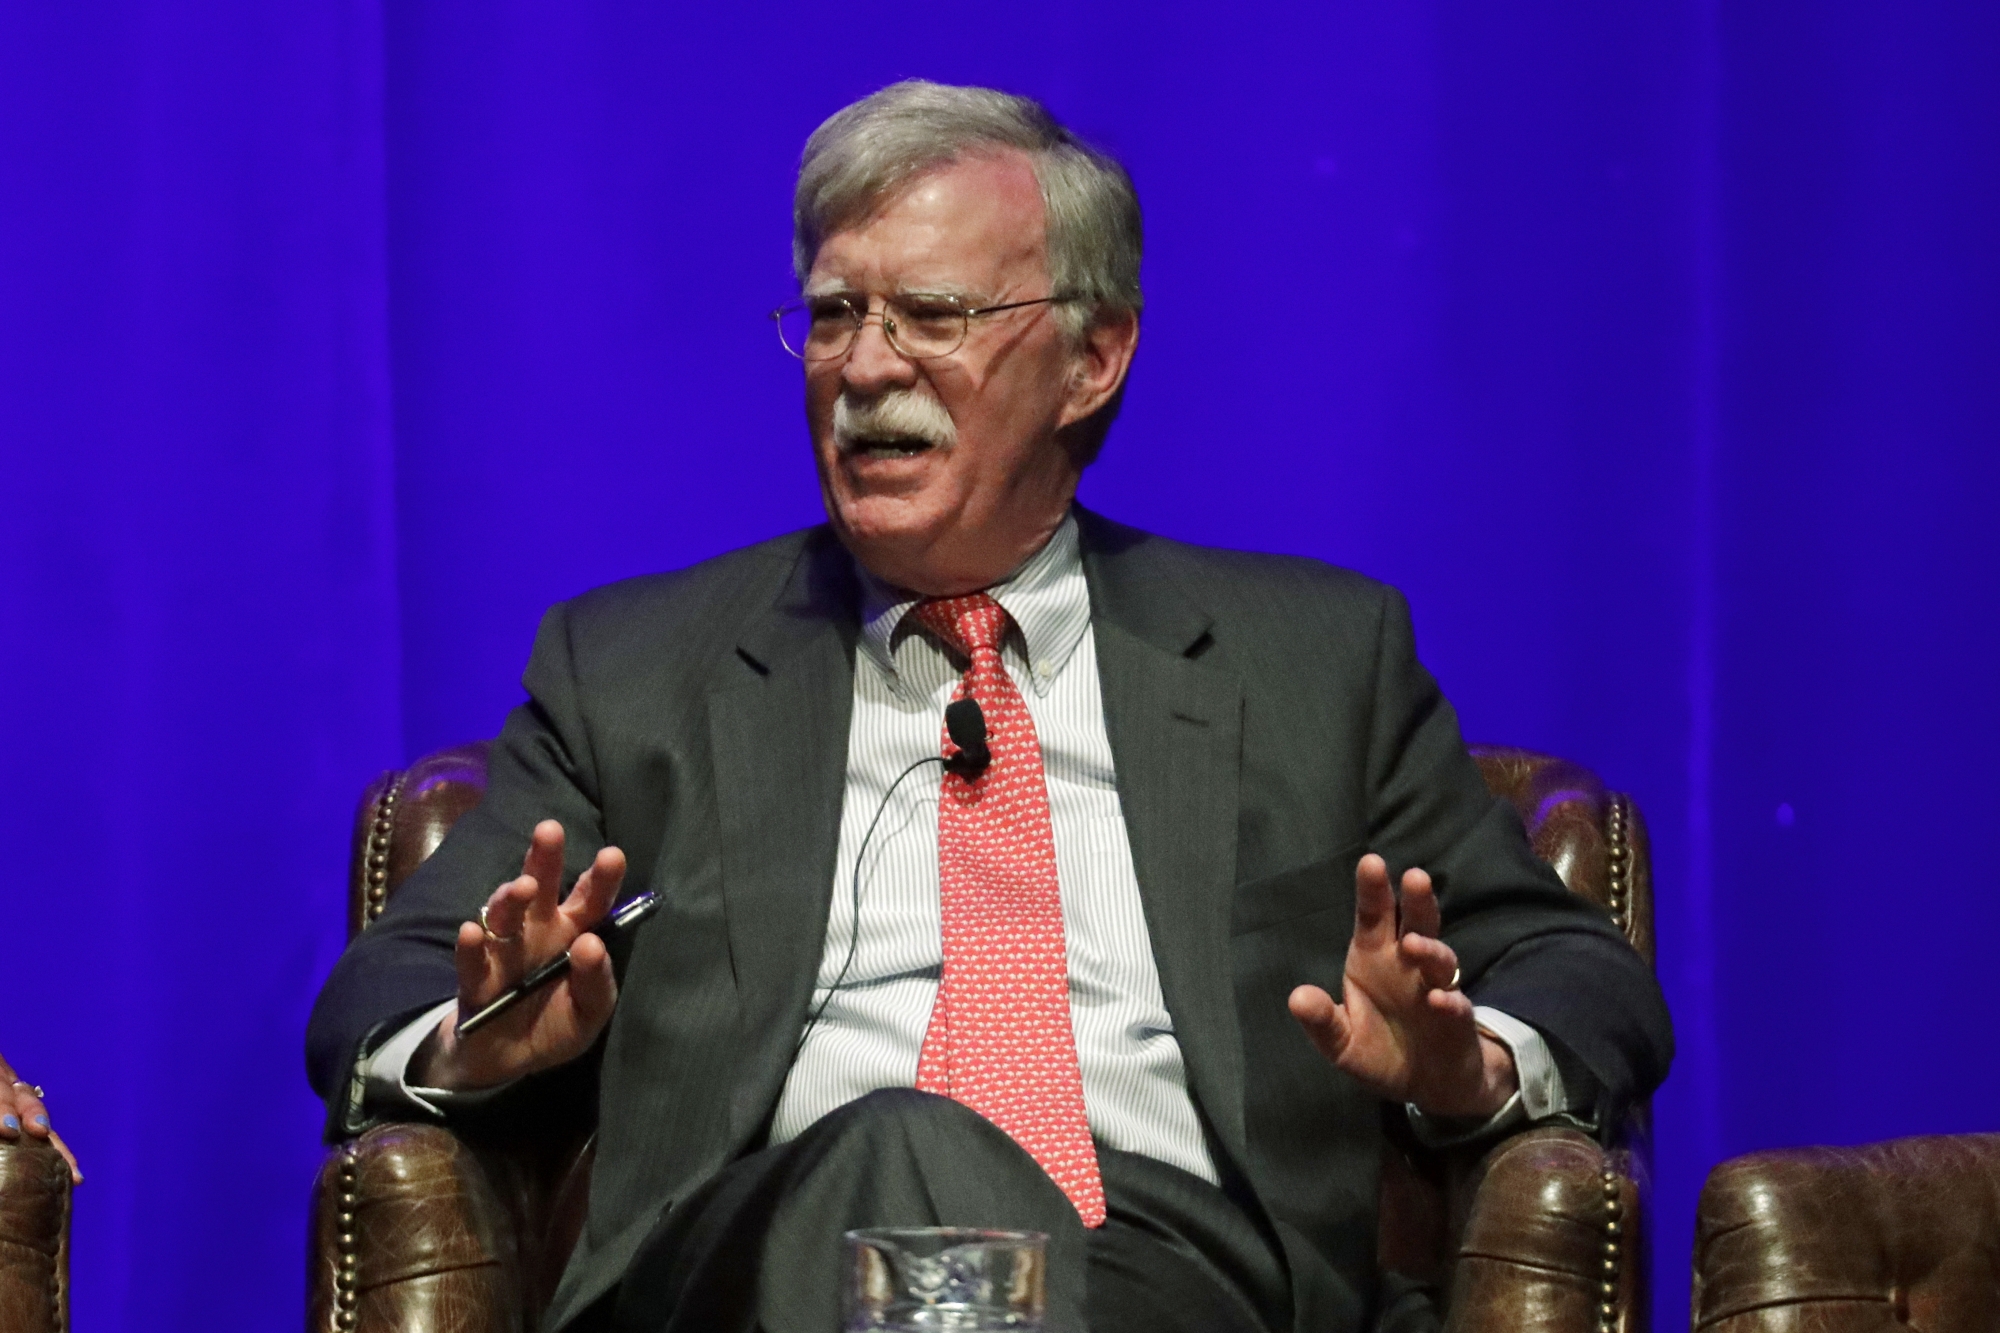 FILE - In this Feb. 19, 2020, file photo, former national security adviser John Bolton takes part in a discussion on global leadership at Vanderbilt University in Nashville, Tenn. An attorney for Bolton said Wednesday, June 10, that President Donald Trump is trying to put on ice publication of the former top administration official‚Äôs forthcoming memoir after White House lawyers again this week raised concerns that the book contains classified material that presents a national security threat. (AP Photo/Mark Humphrey, File)
John Bolton
ArcInfo